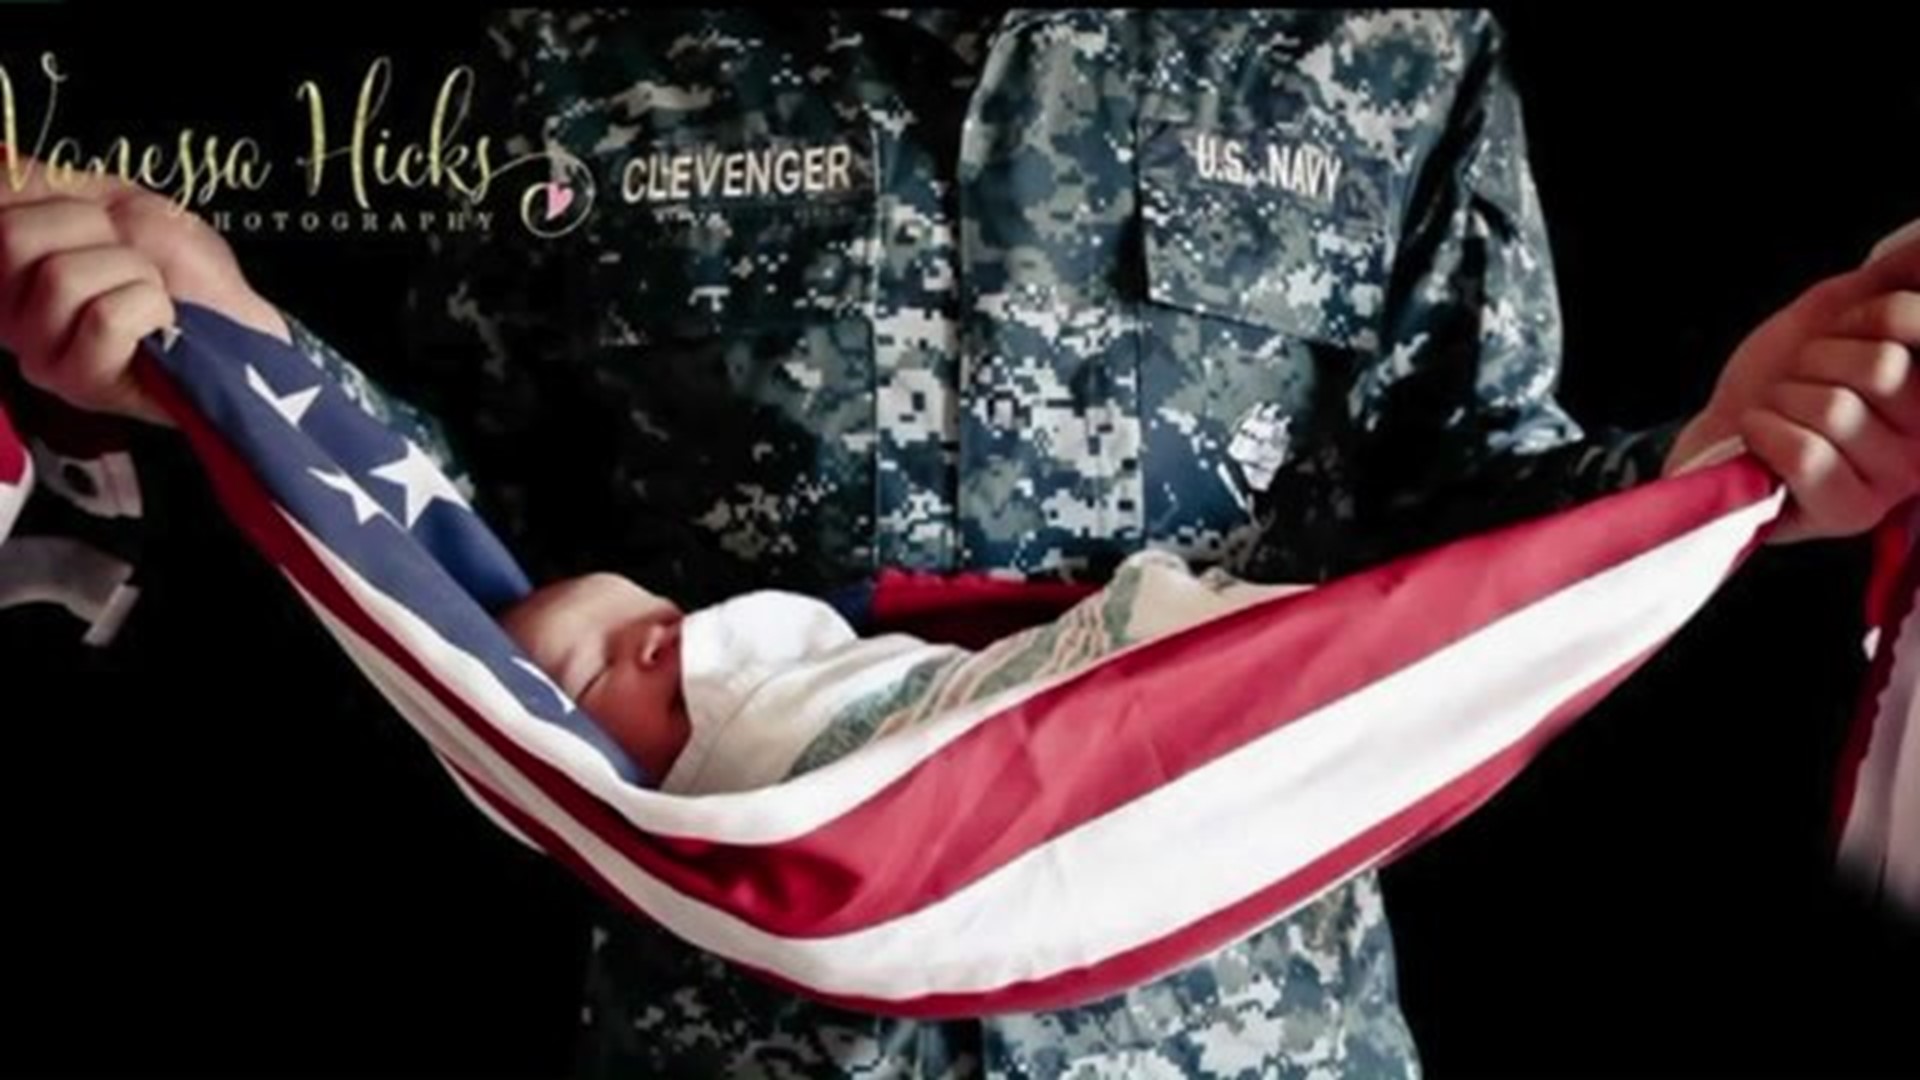 Photographer gets backlash from photo including flag